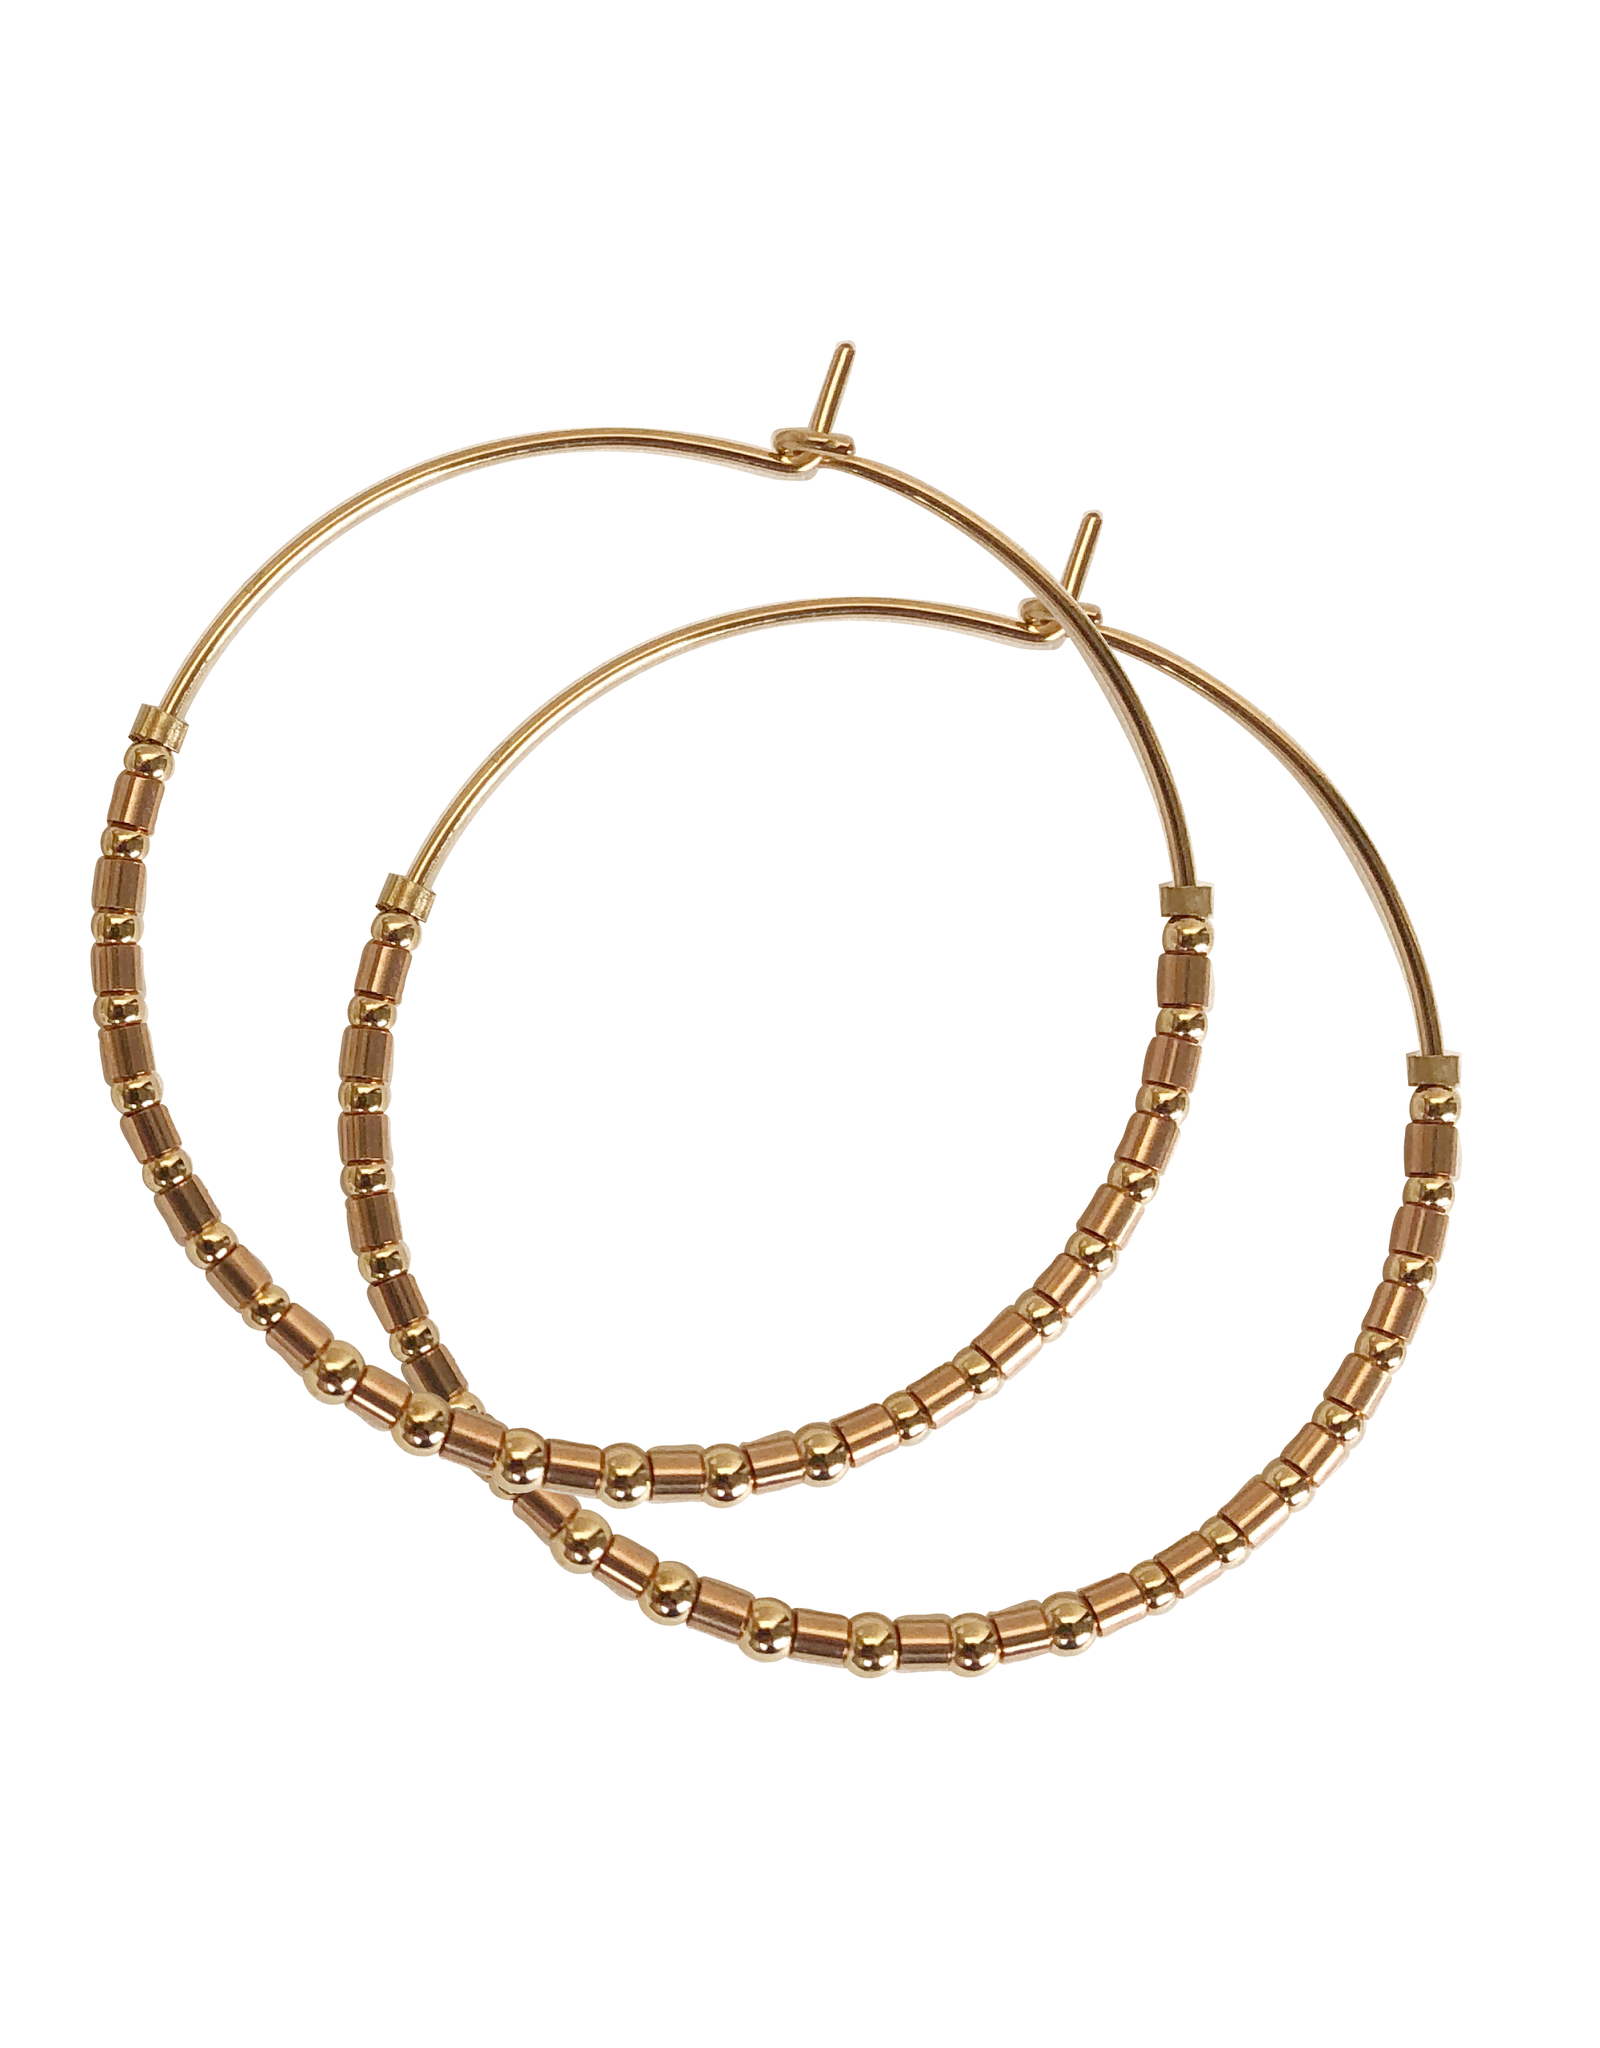 PS Gold and Rose Gold Hoops